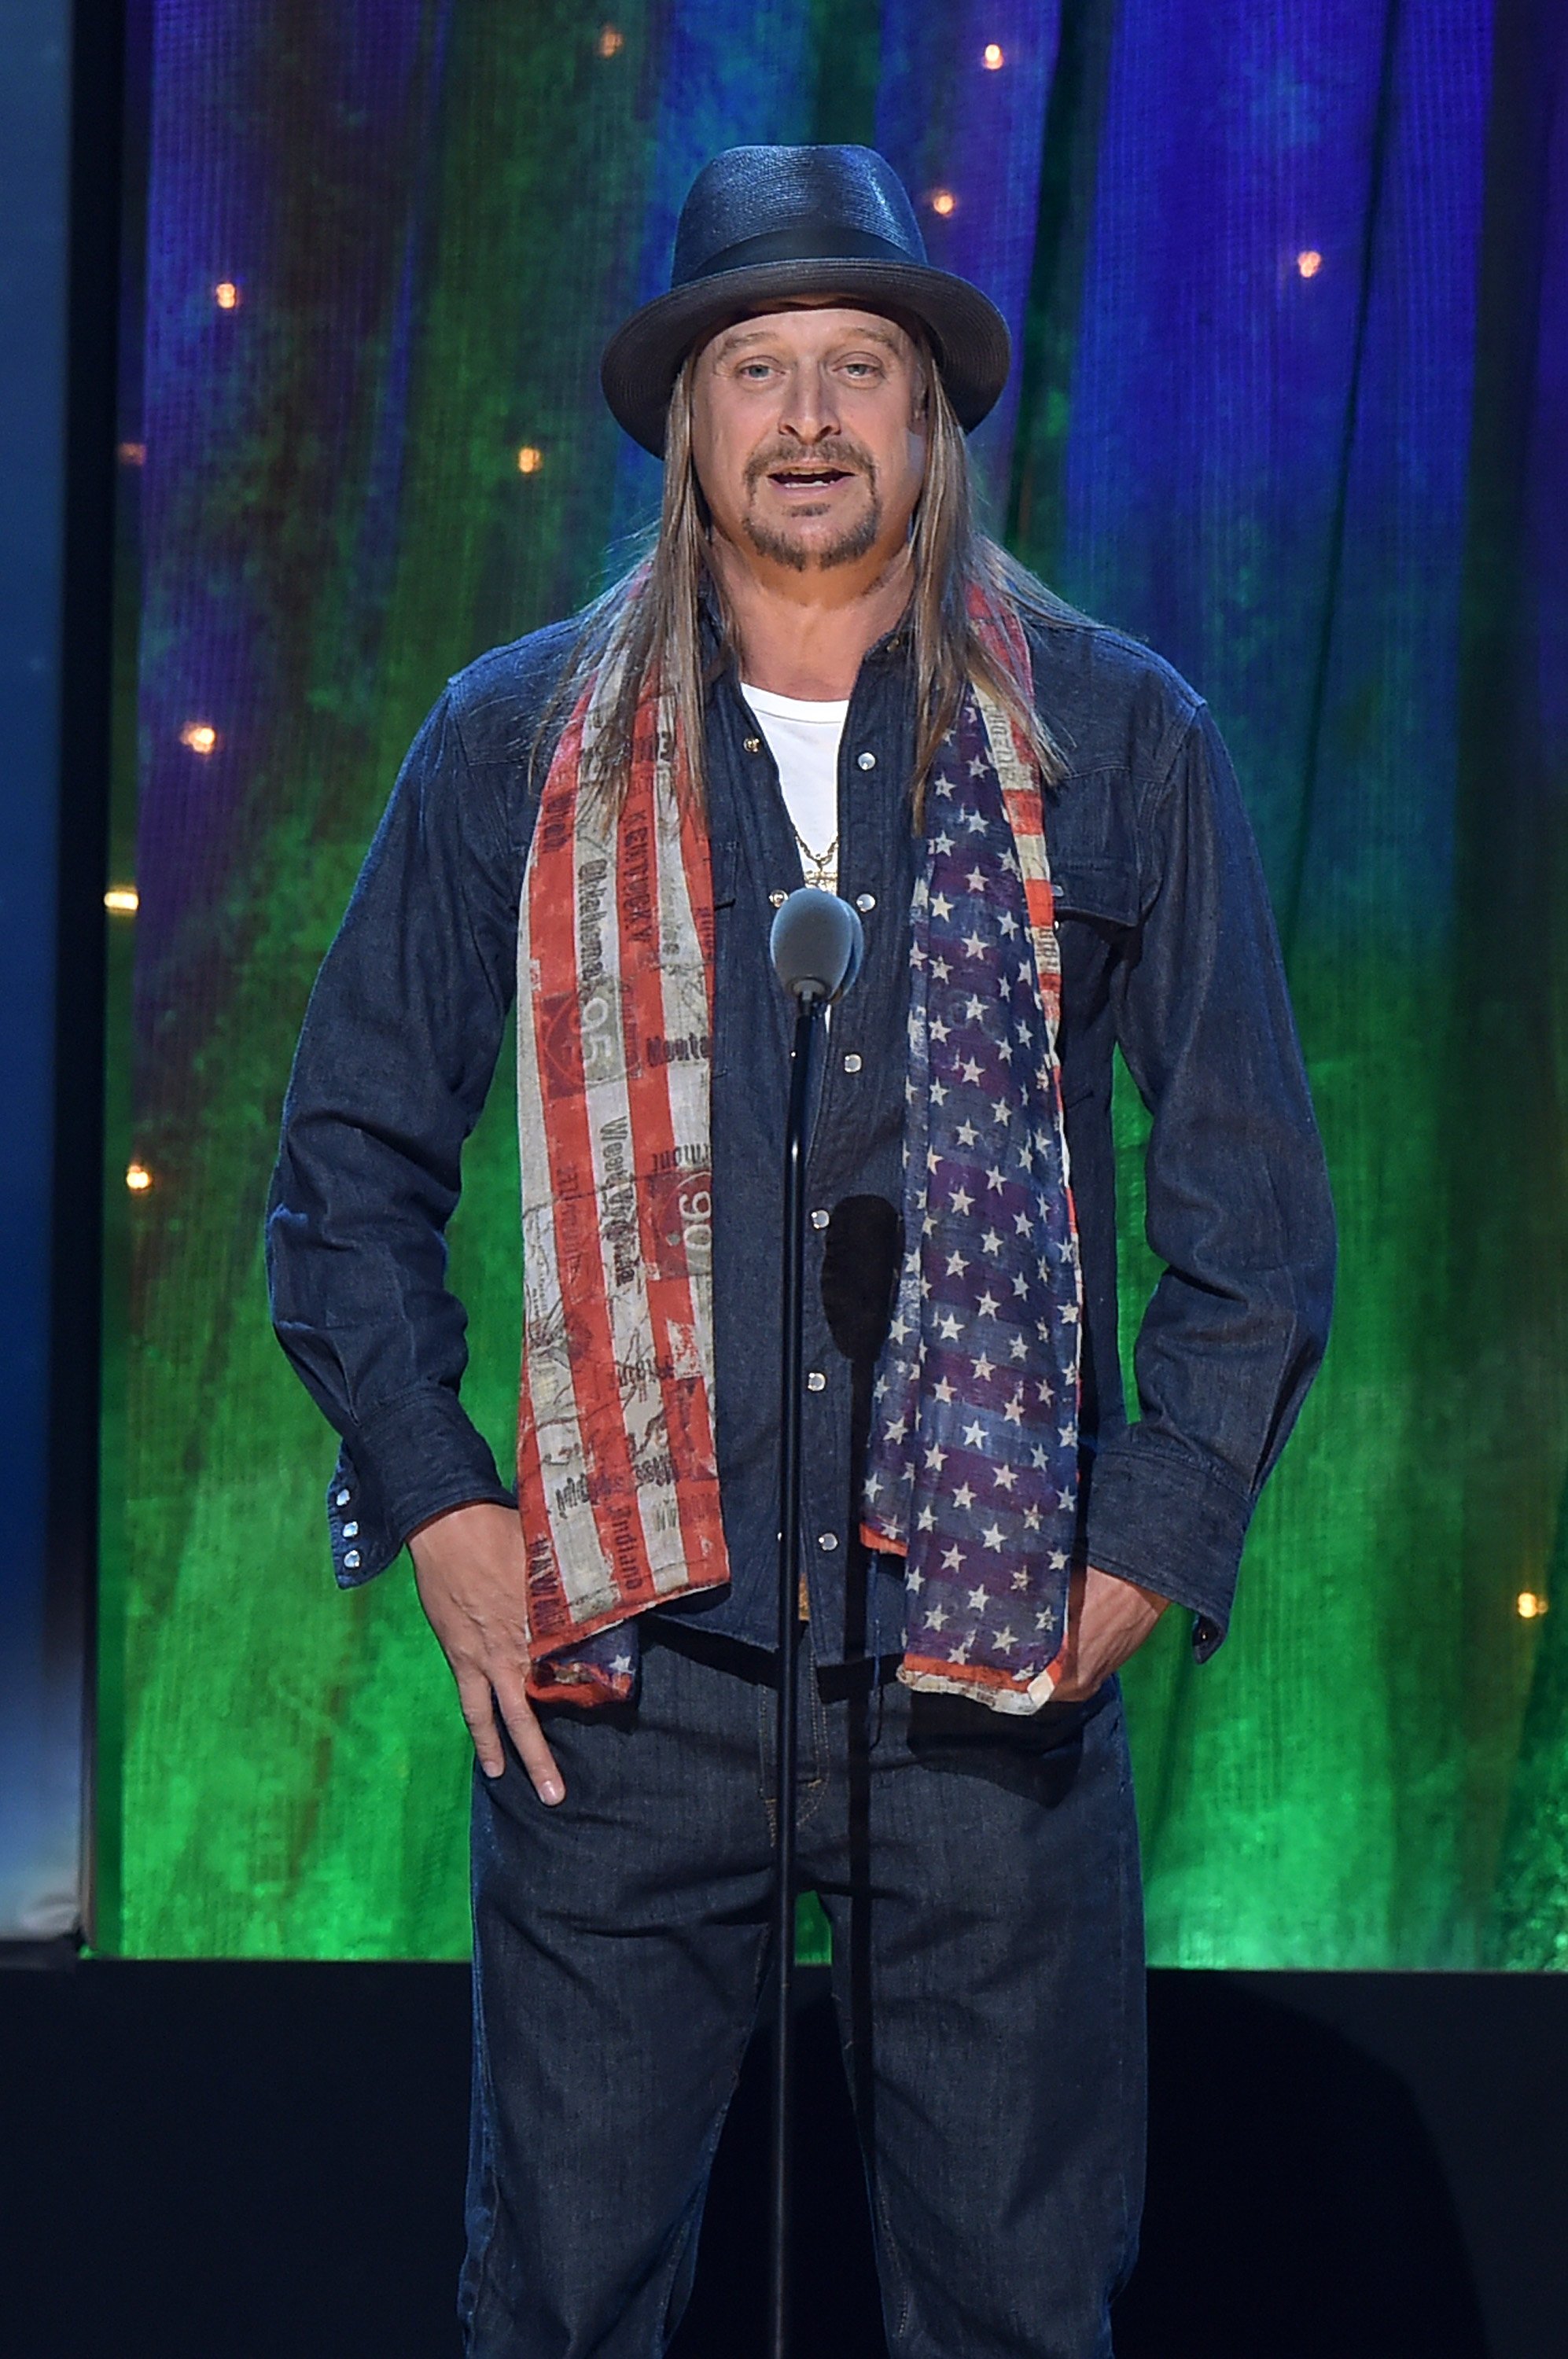 Kid Rock inducts Cheap Trick at the 31st Annual Rock And Roll Hall Of Fame Induction Ceremony at Barclays Center on April 8, 2016, in New York City. | Source: Getty Images.